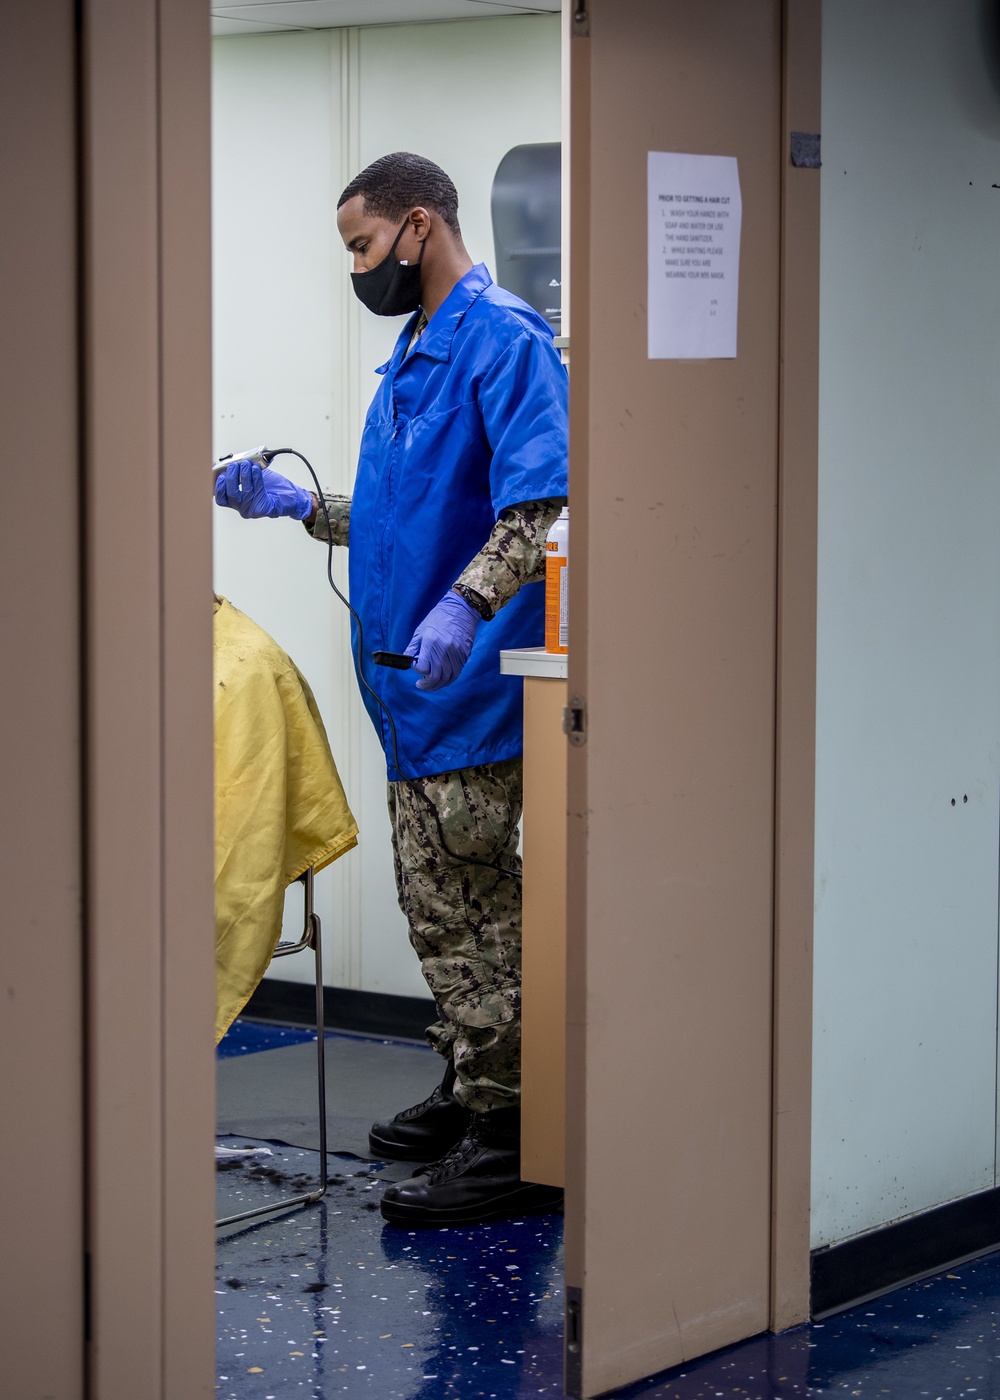 USNS Mercy Sailor Works in the Barbershop